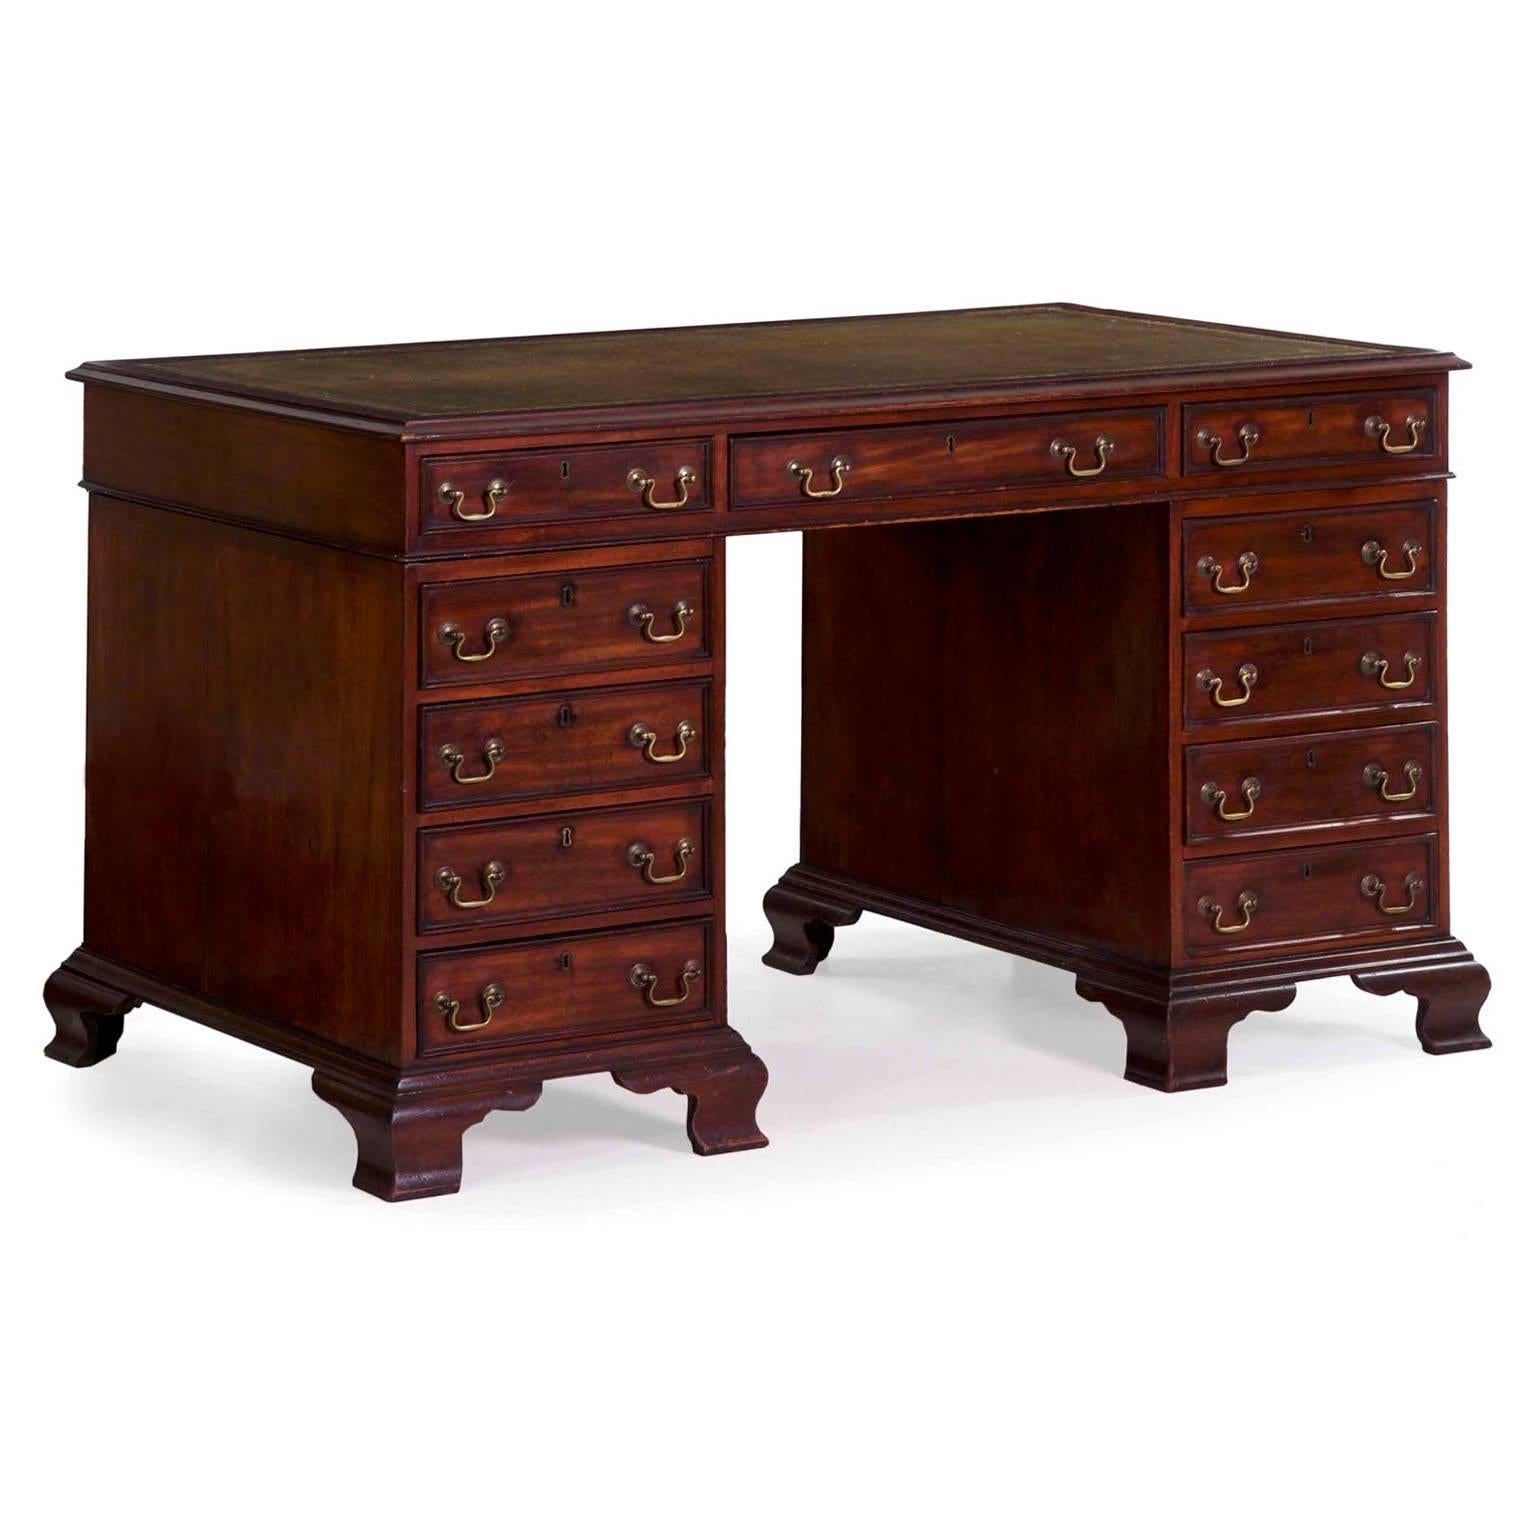 A beautiful presentation with its old and deeply oxidized surface, the desk has lovely hue variation from vibrant red mahogany to dark browns and fading into nearly black in the deepest crevices and corners. It retains the original gilt-tooled green